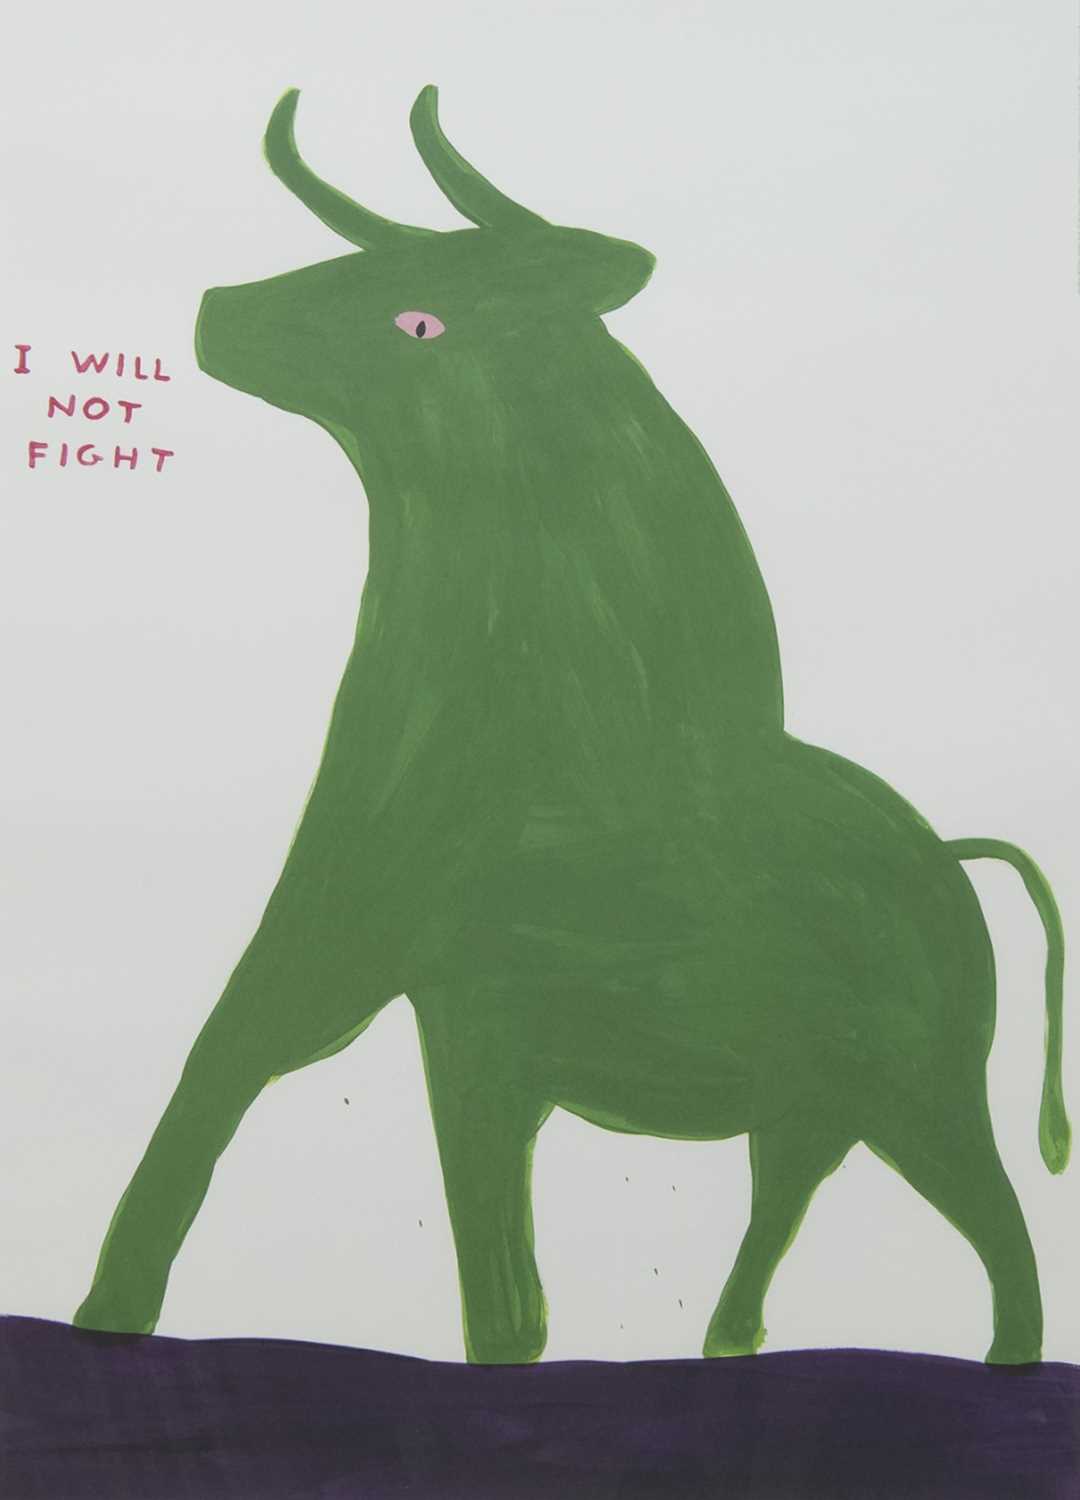 Lot 563 - I WILL NOT FIGHT, A LITHOGRAPH BY DAVID SHRIGLEY